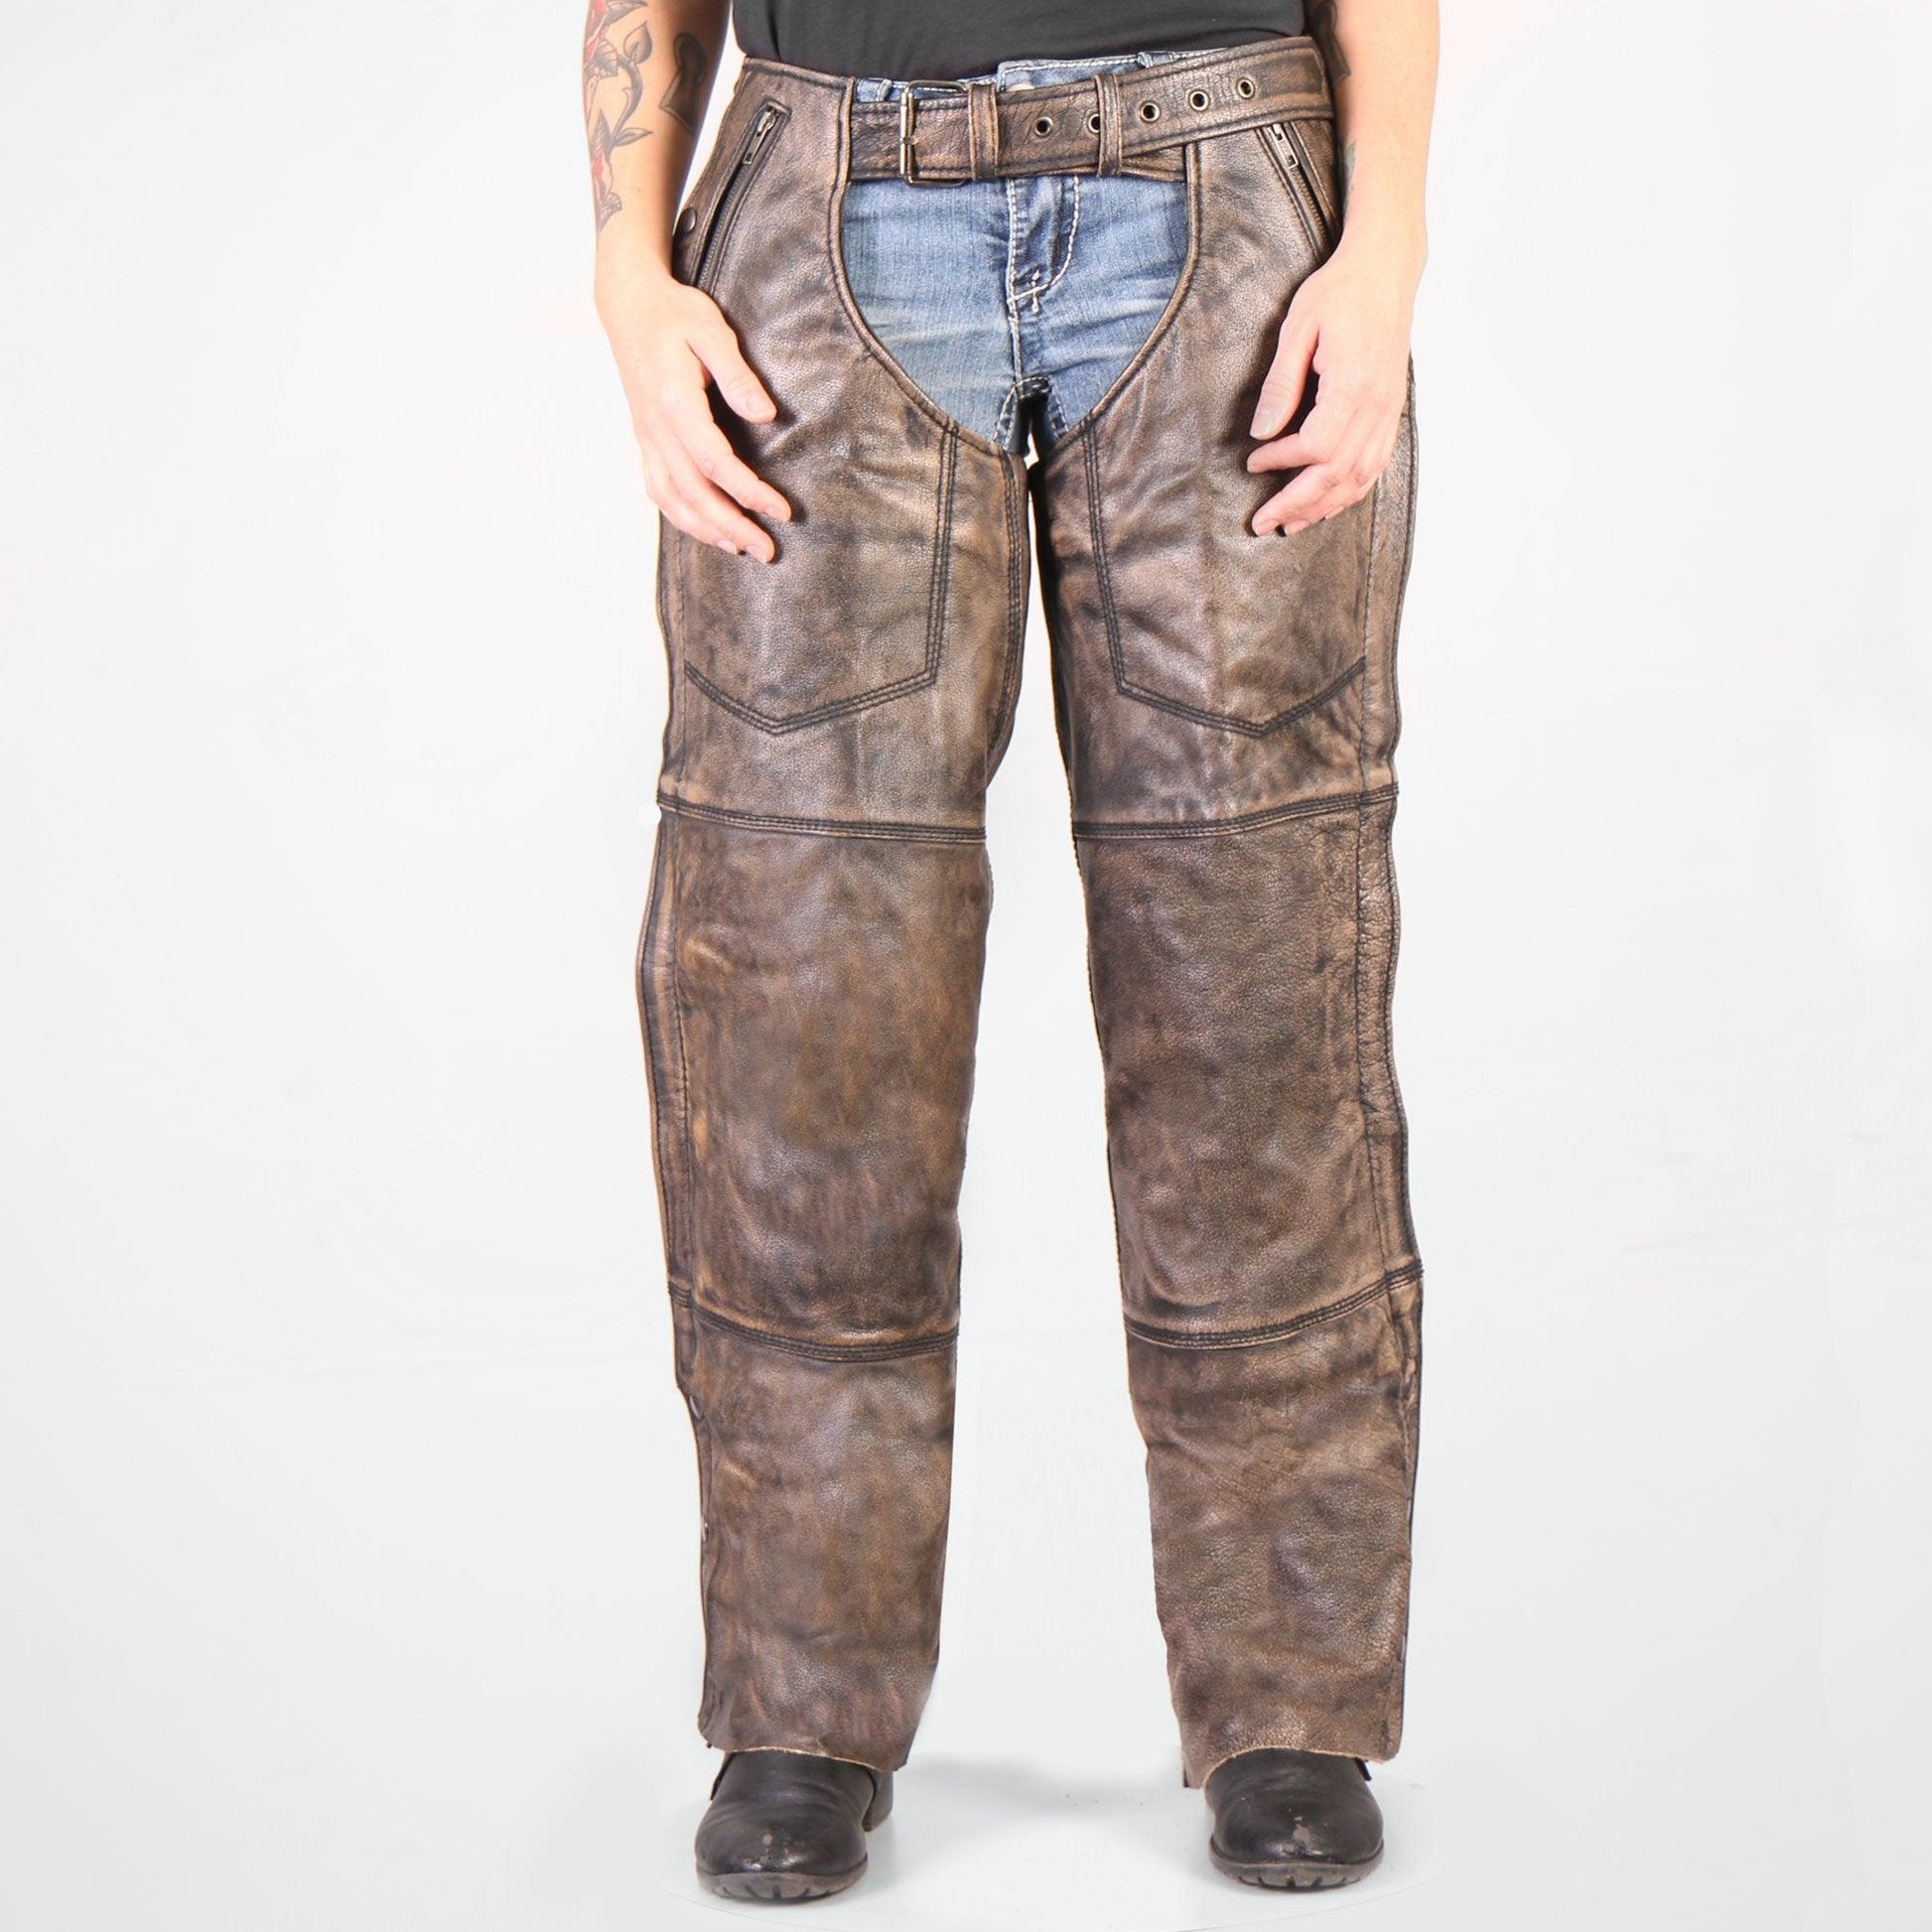 Fully Lined Premium Heavyweight Distressed Brown Leather Chaps for Men and Women - Military Republic